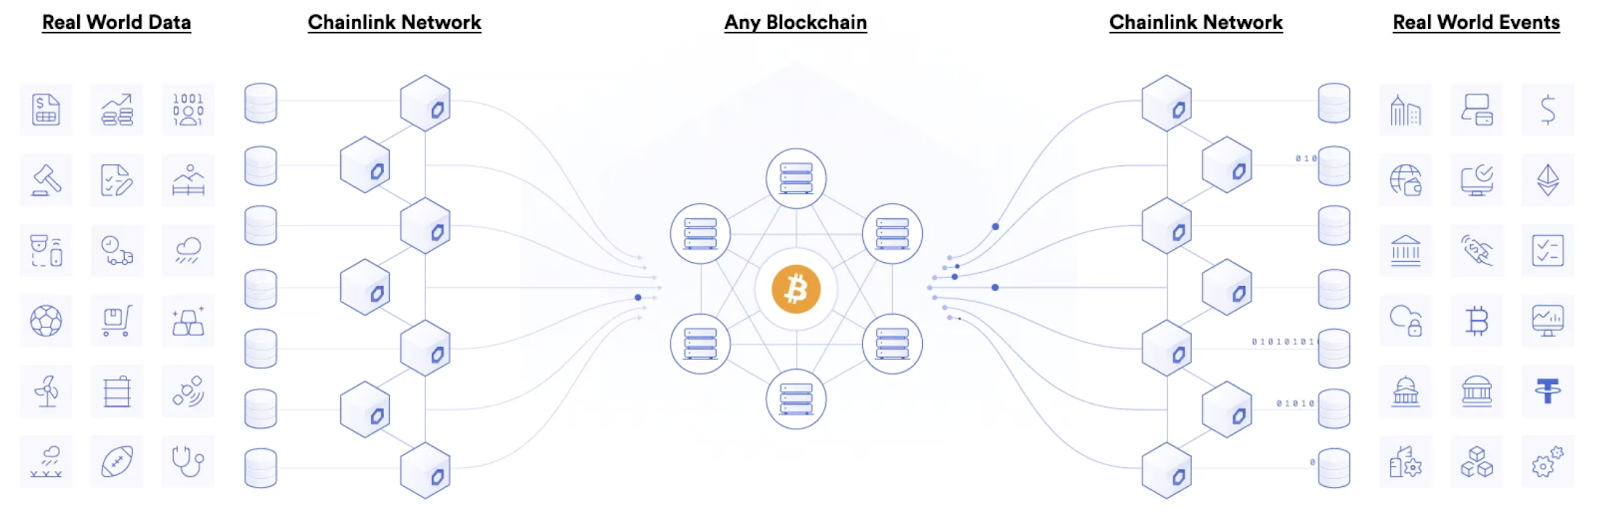 Chainlink Interconnections